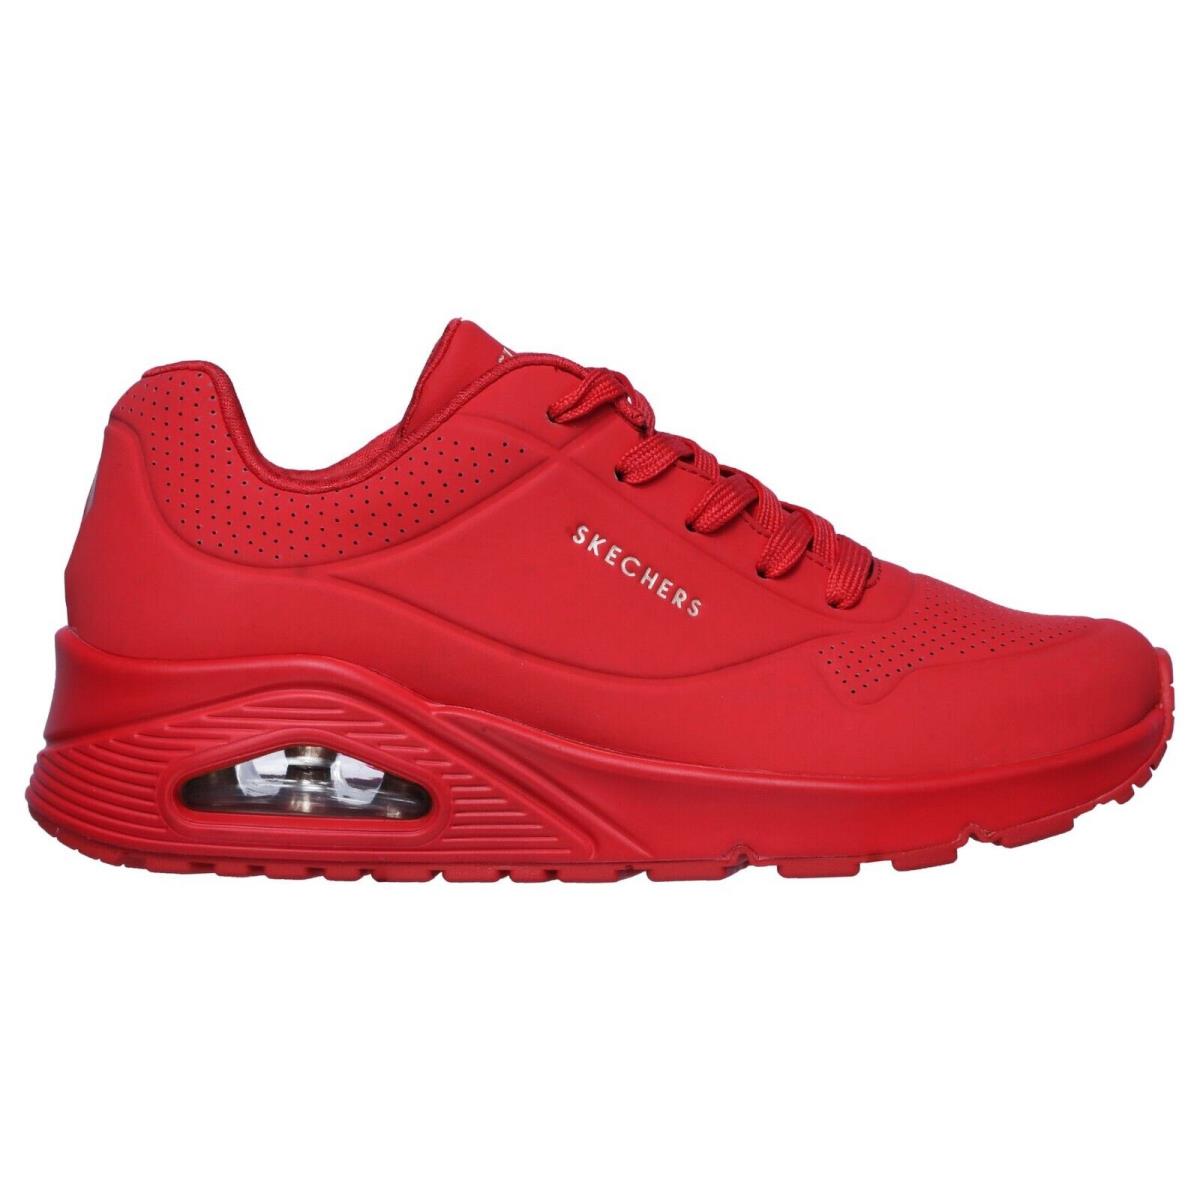 Skechers shoes  - Red 10